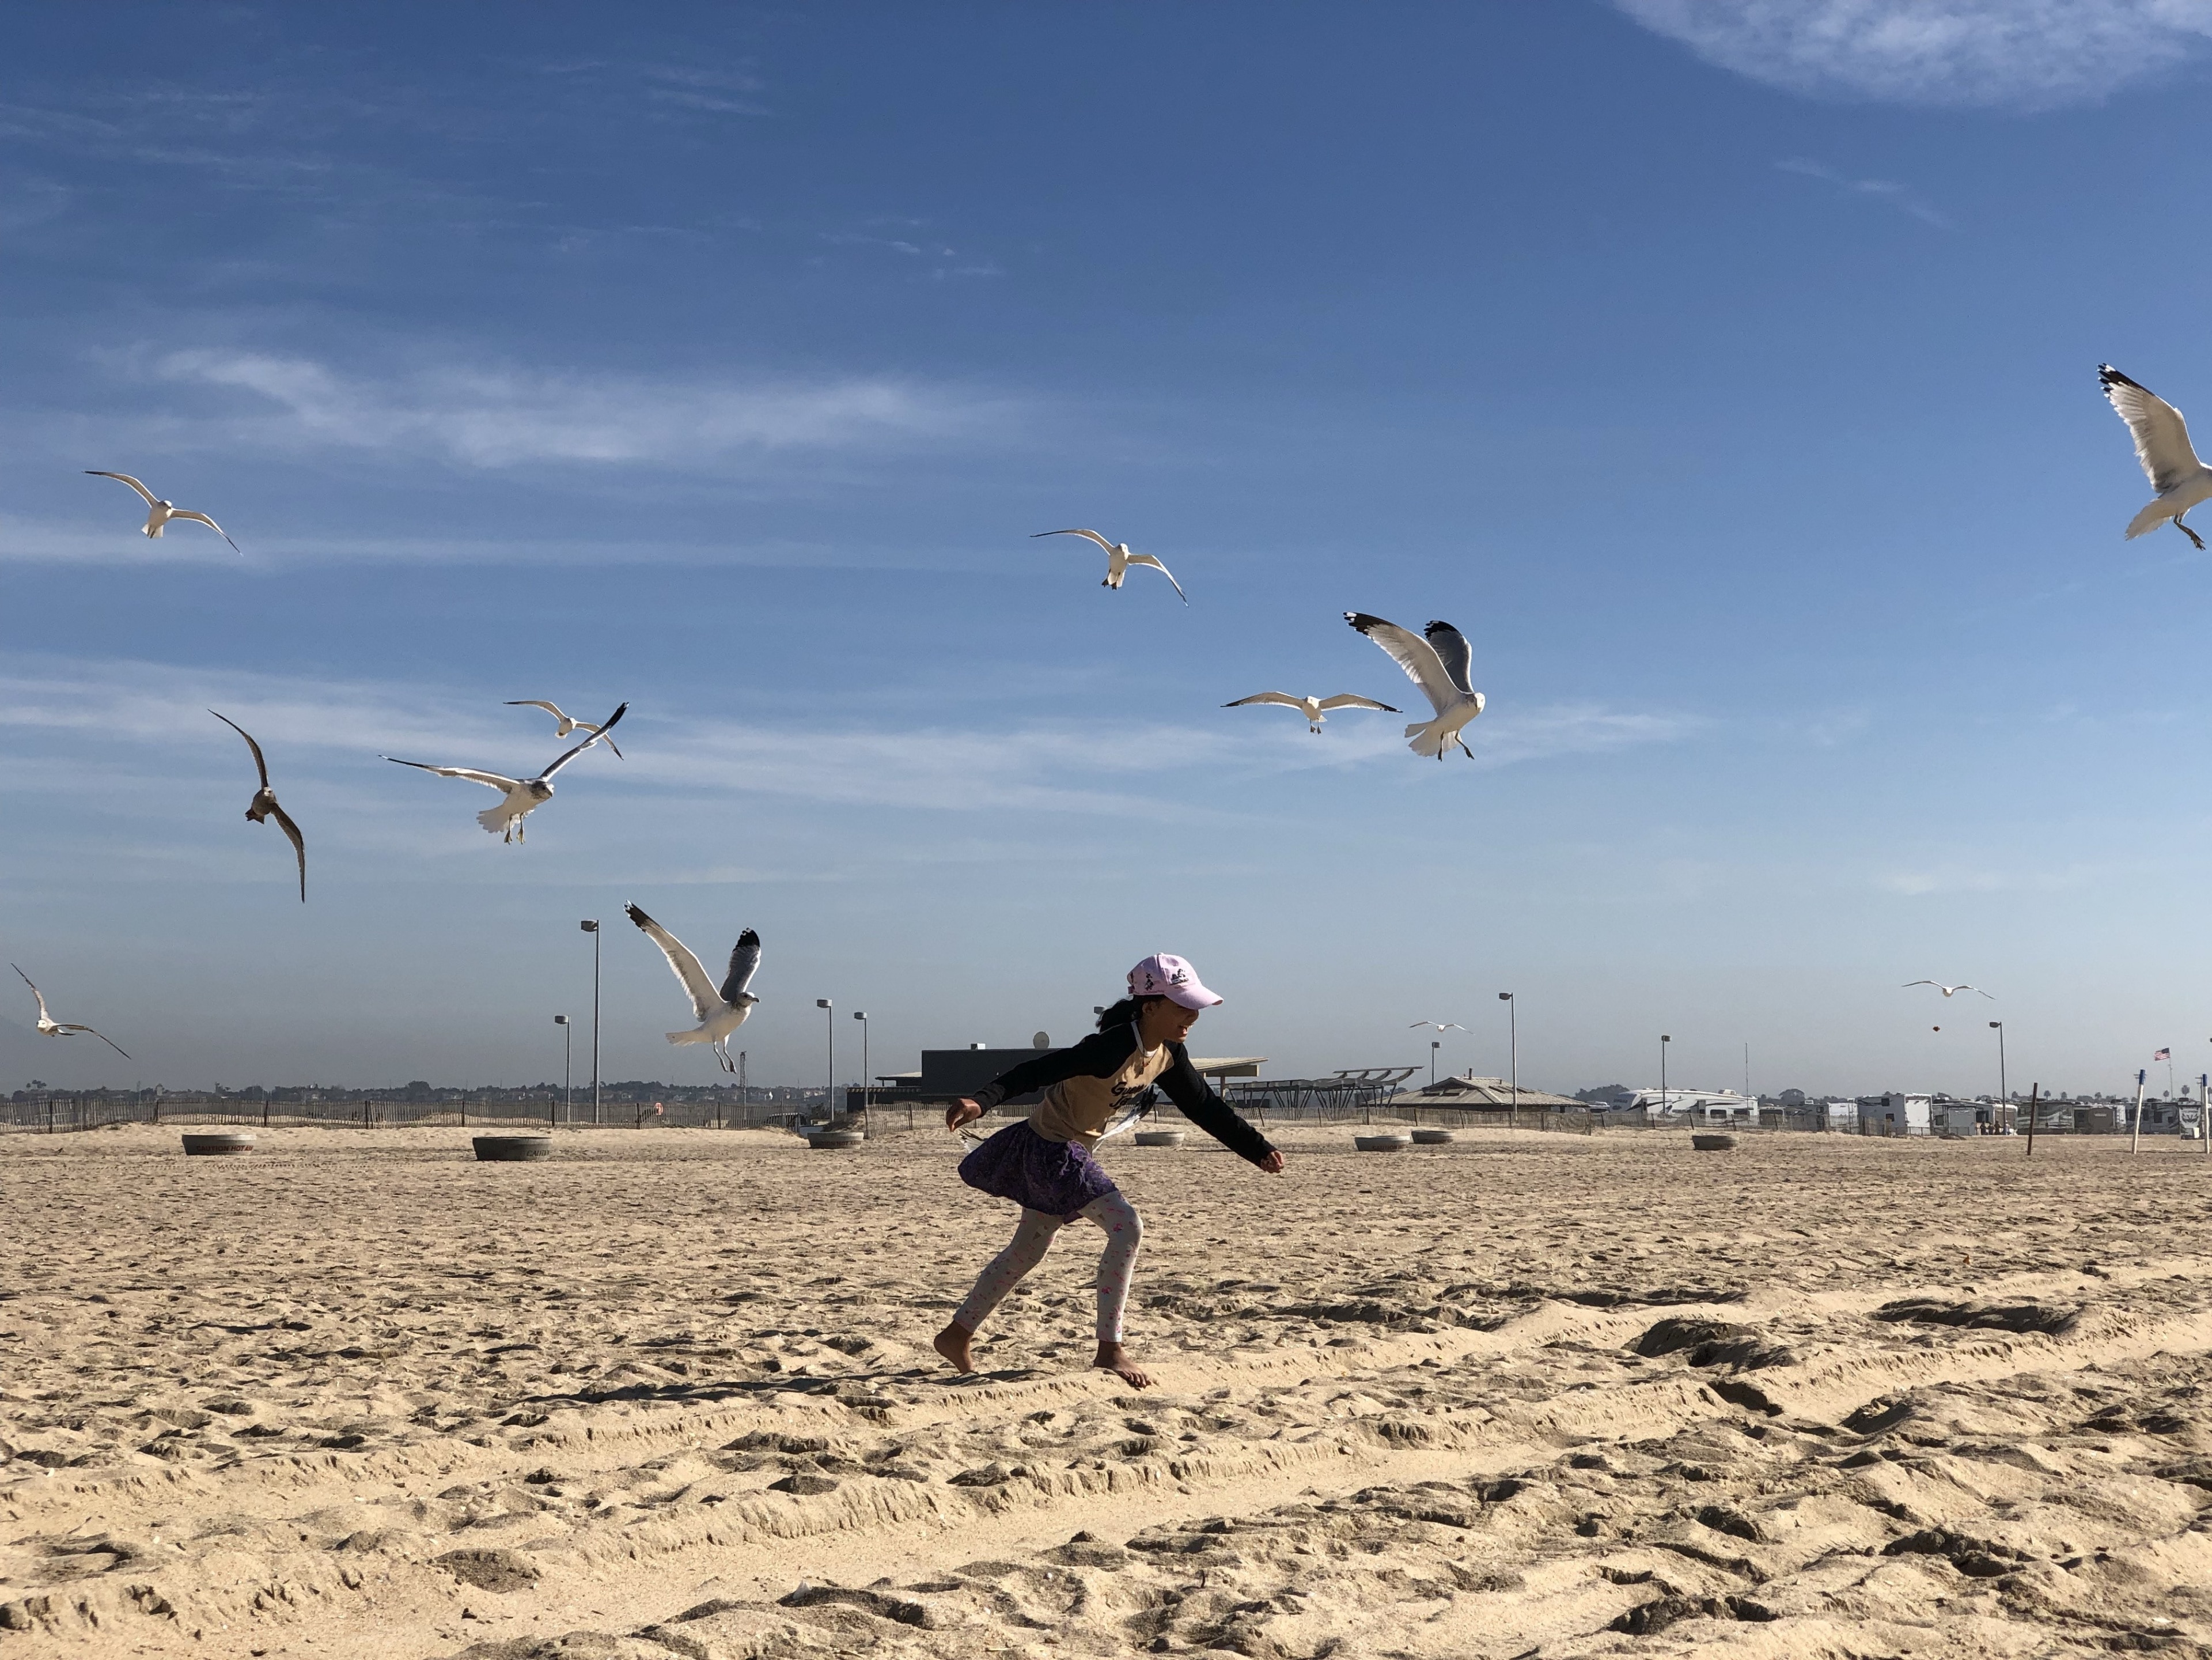 Being attacked by birds